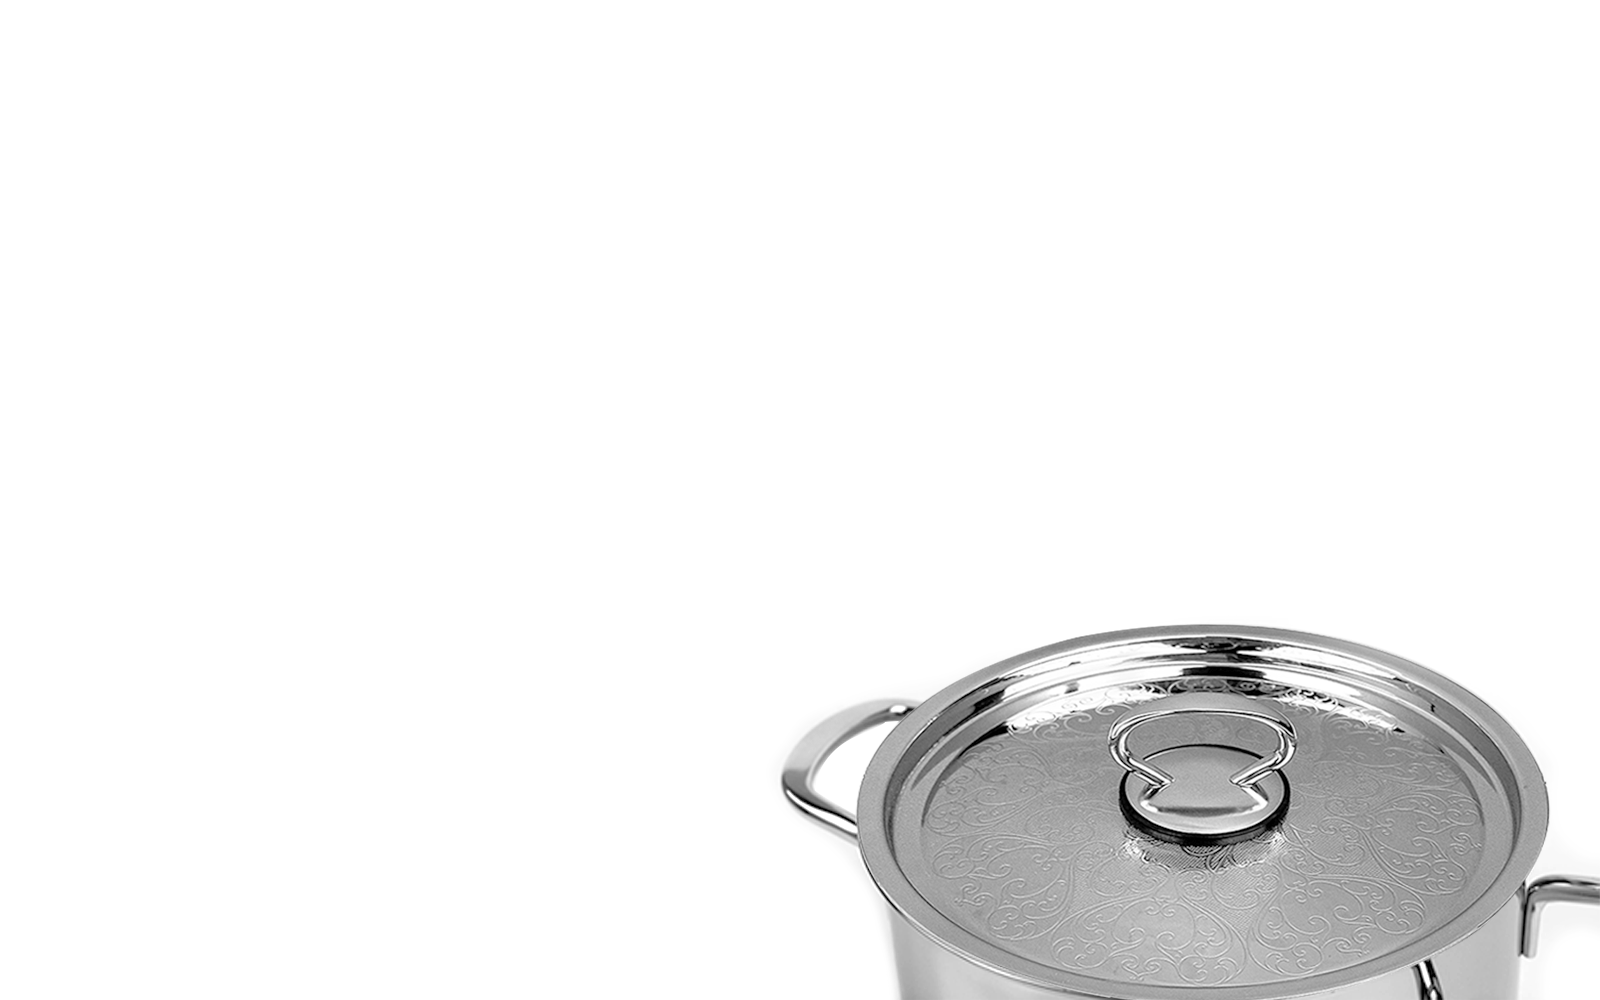 Pradeep Stainless Steel Triply Cookpot with SS Design Lid (PROLINE)